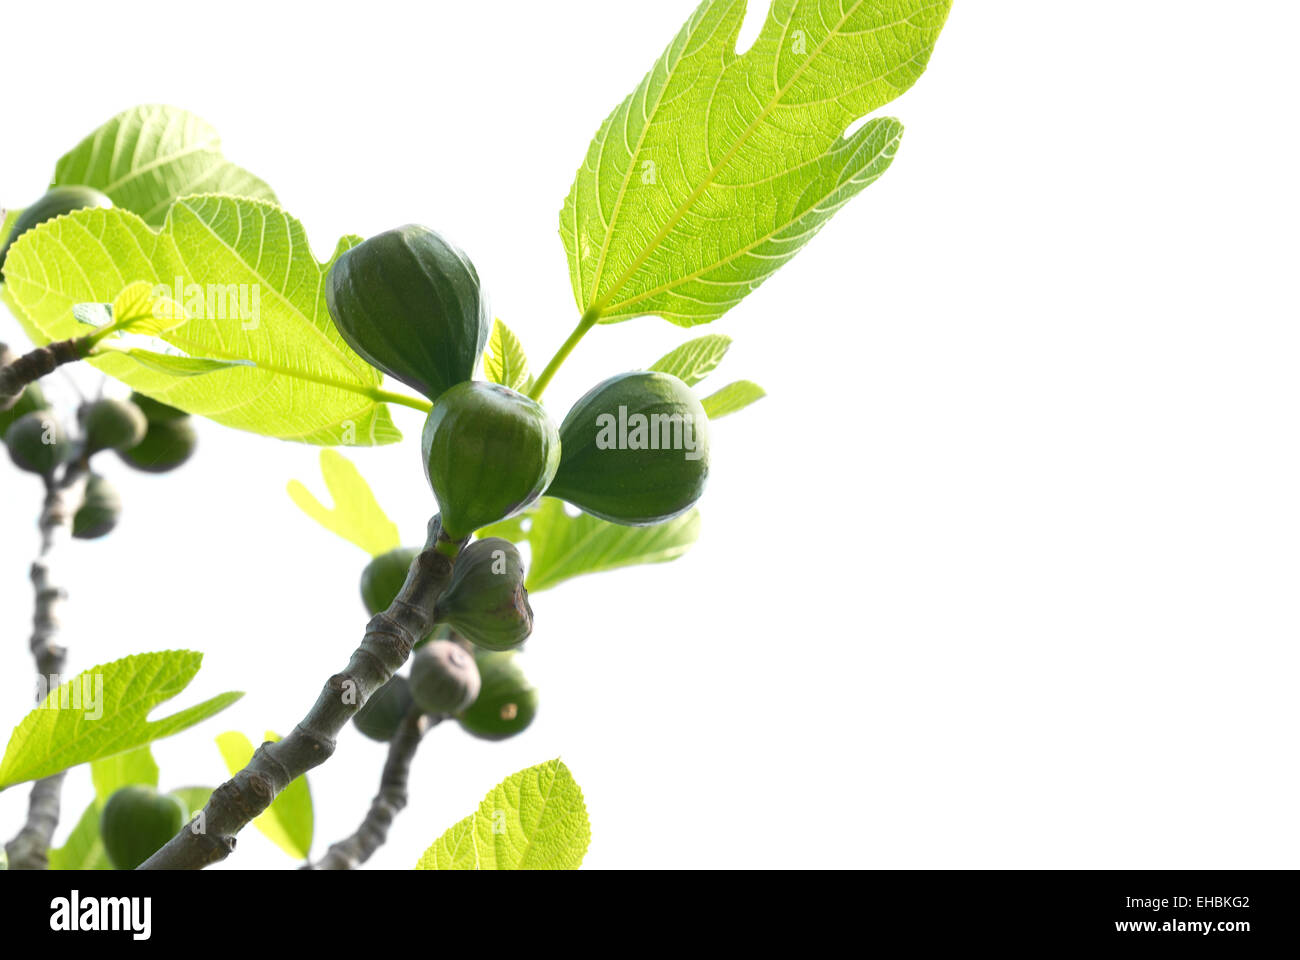 Figs with green leaves isolated on white Stock Photo